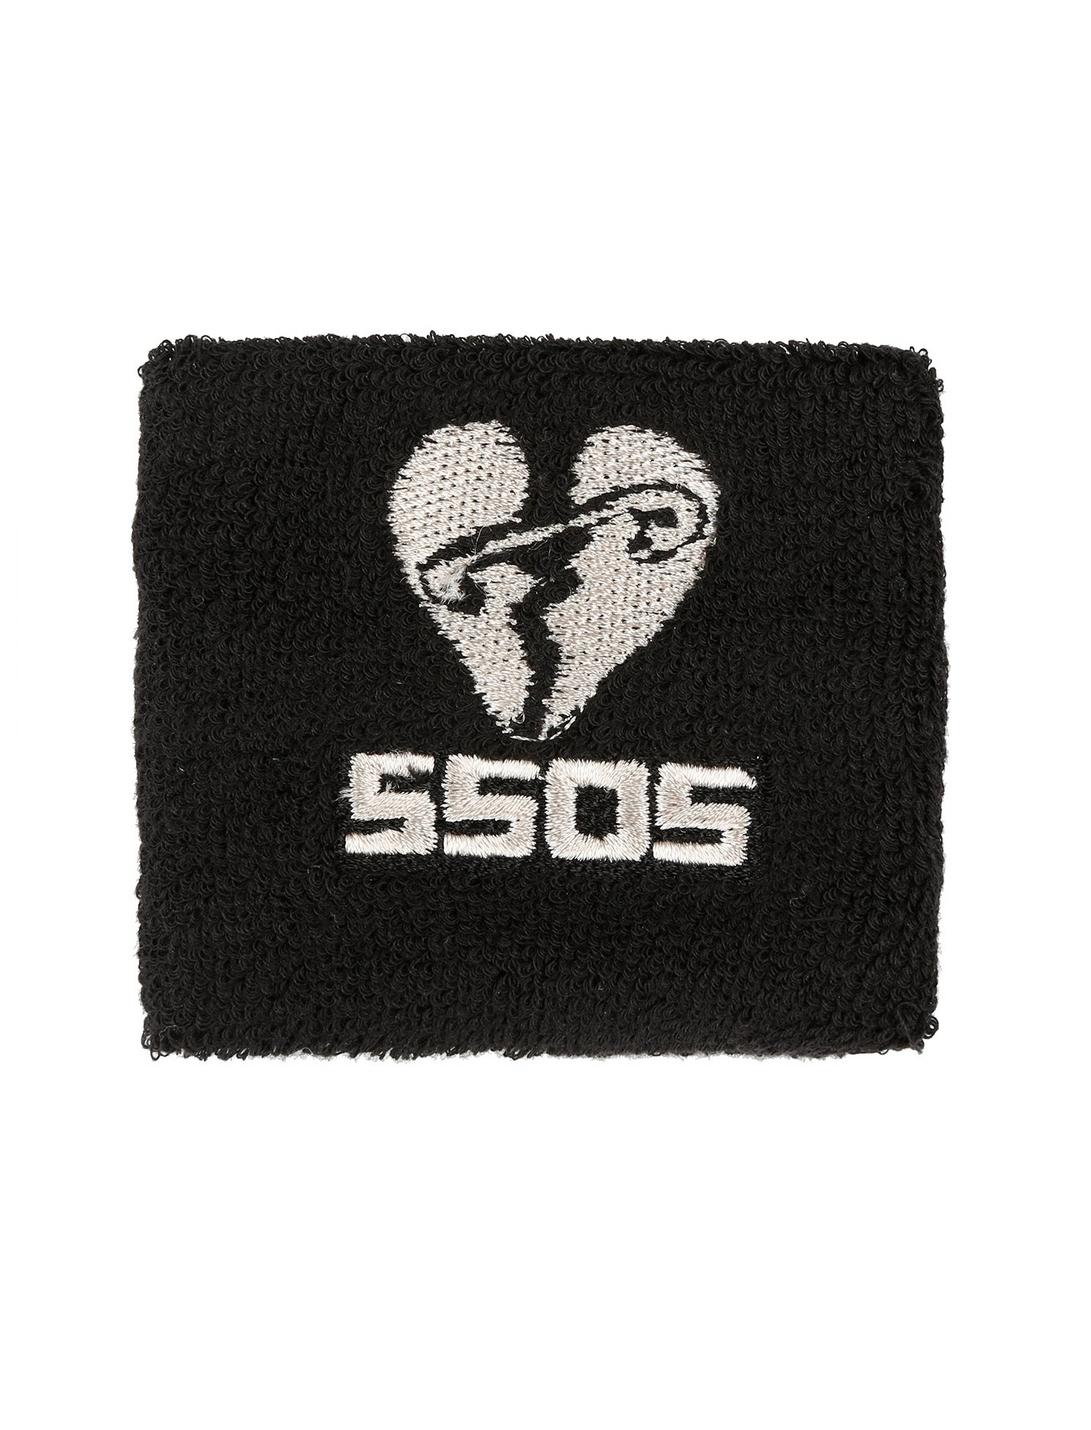 5 Seconds Of Summer 5SOS Heart Terry Wristband, , hi-res